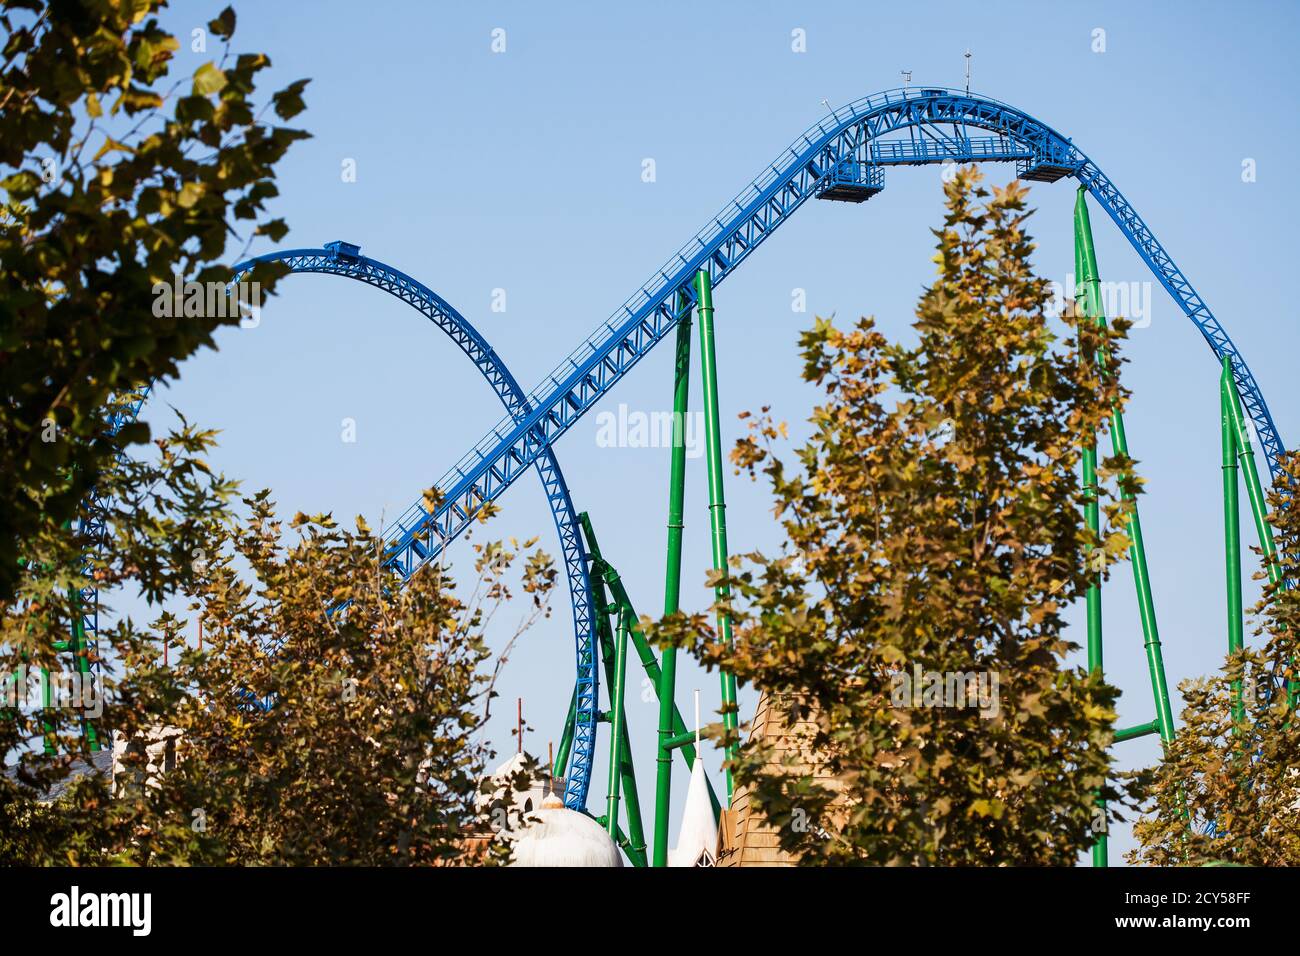 American extreme roller coaster. Amusement Park in Turkey Park of Legends  Stock Photo - Alamy